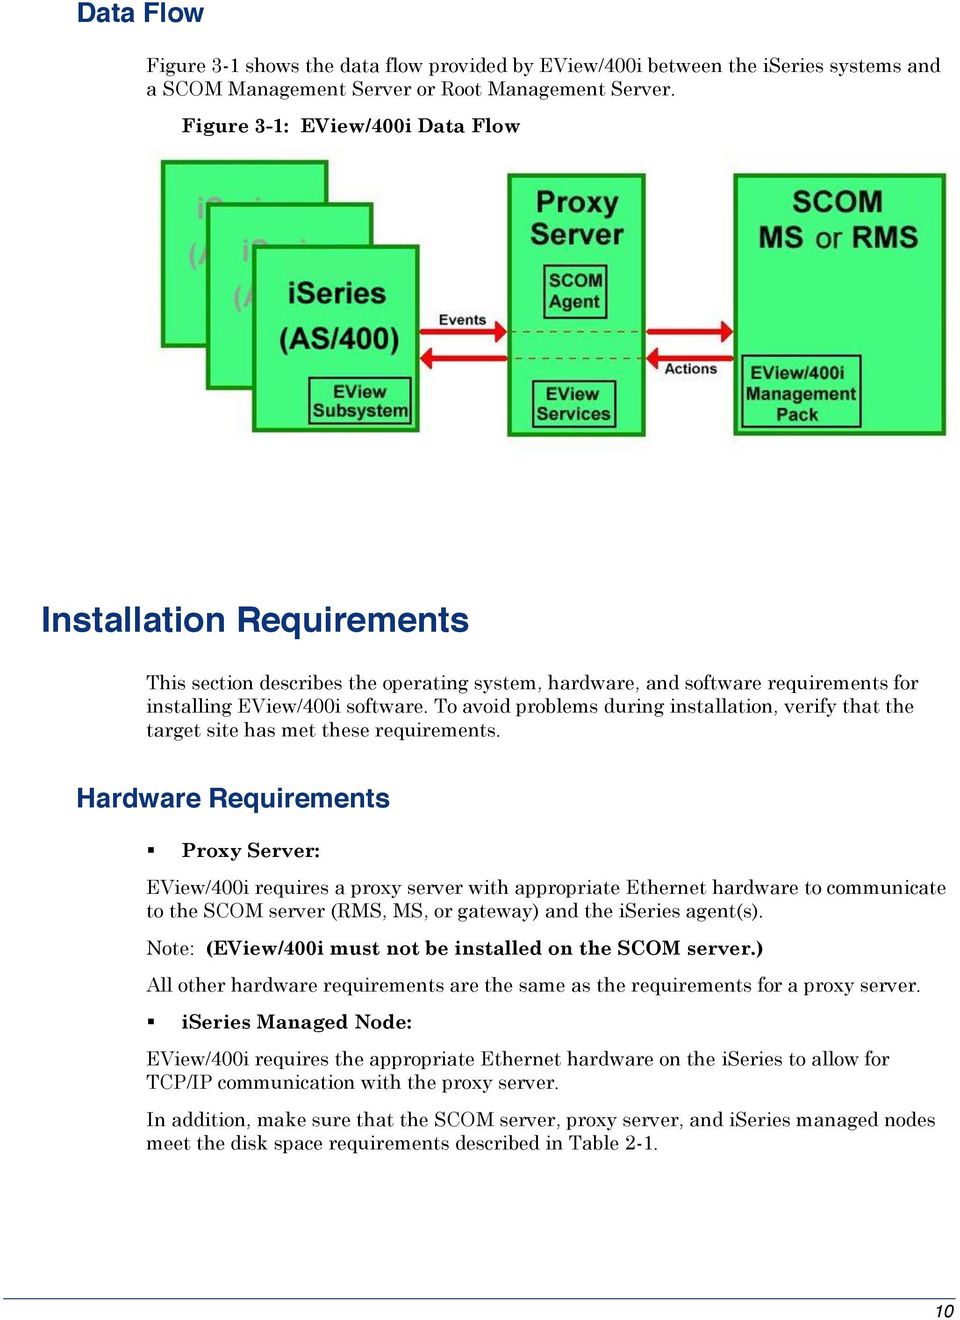 To avoid problems during installation, verify that the target site has met these requirements.